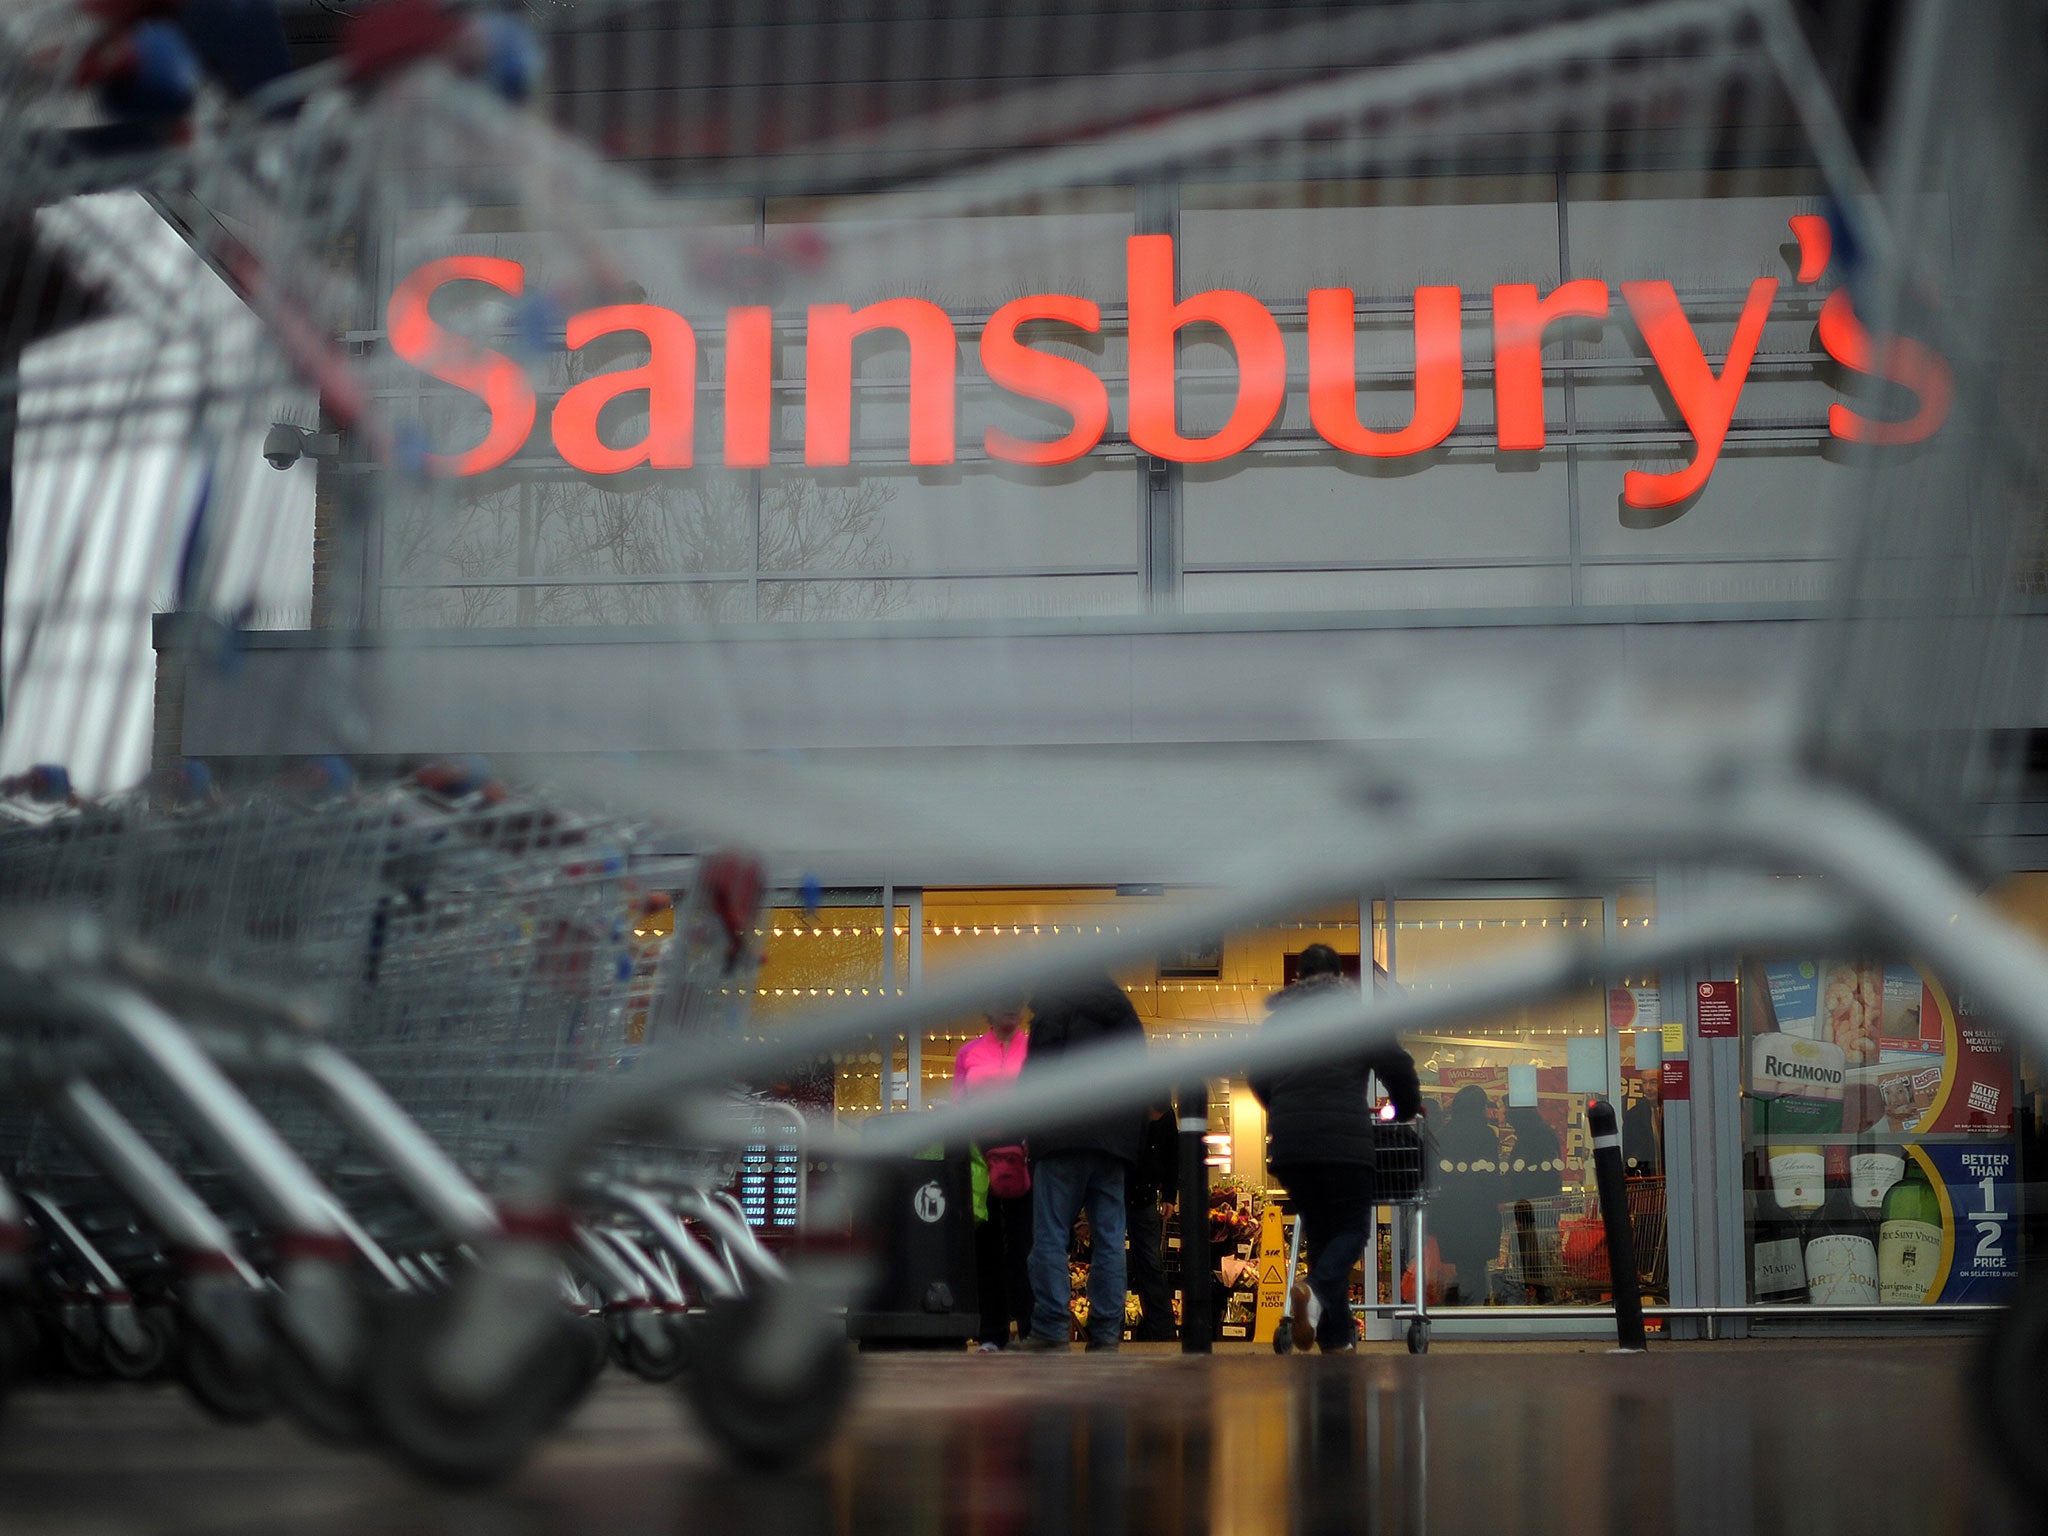 Sainsbury’s recently went public about a takeover of Homebase and Argos owner Home Retail Group